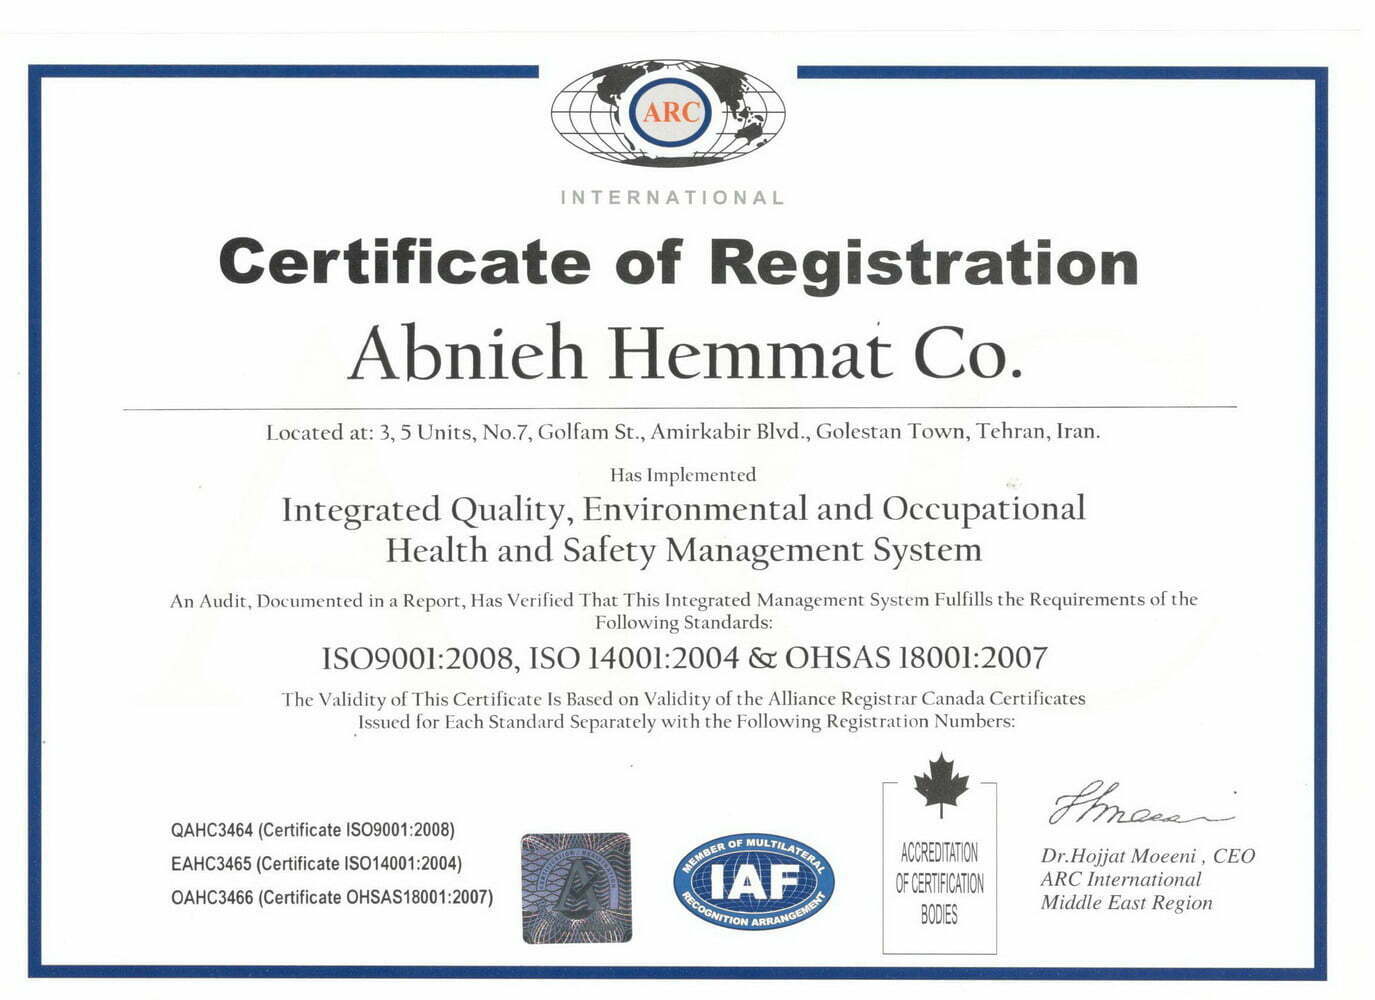 Integrated Quality, Environmental and Occupational Health